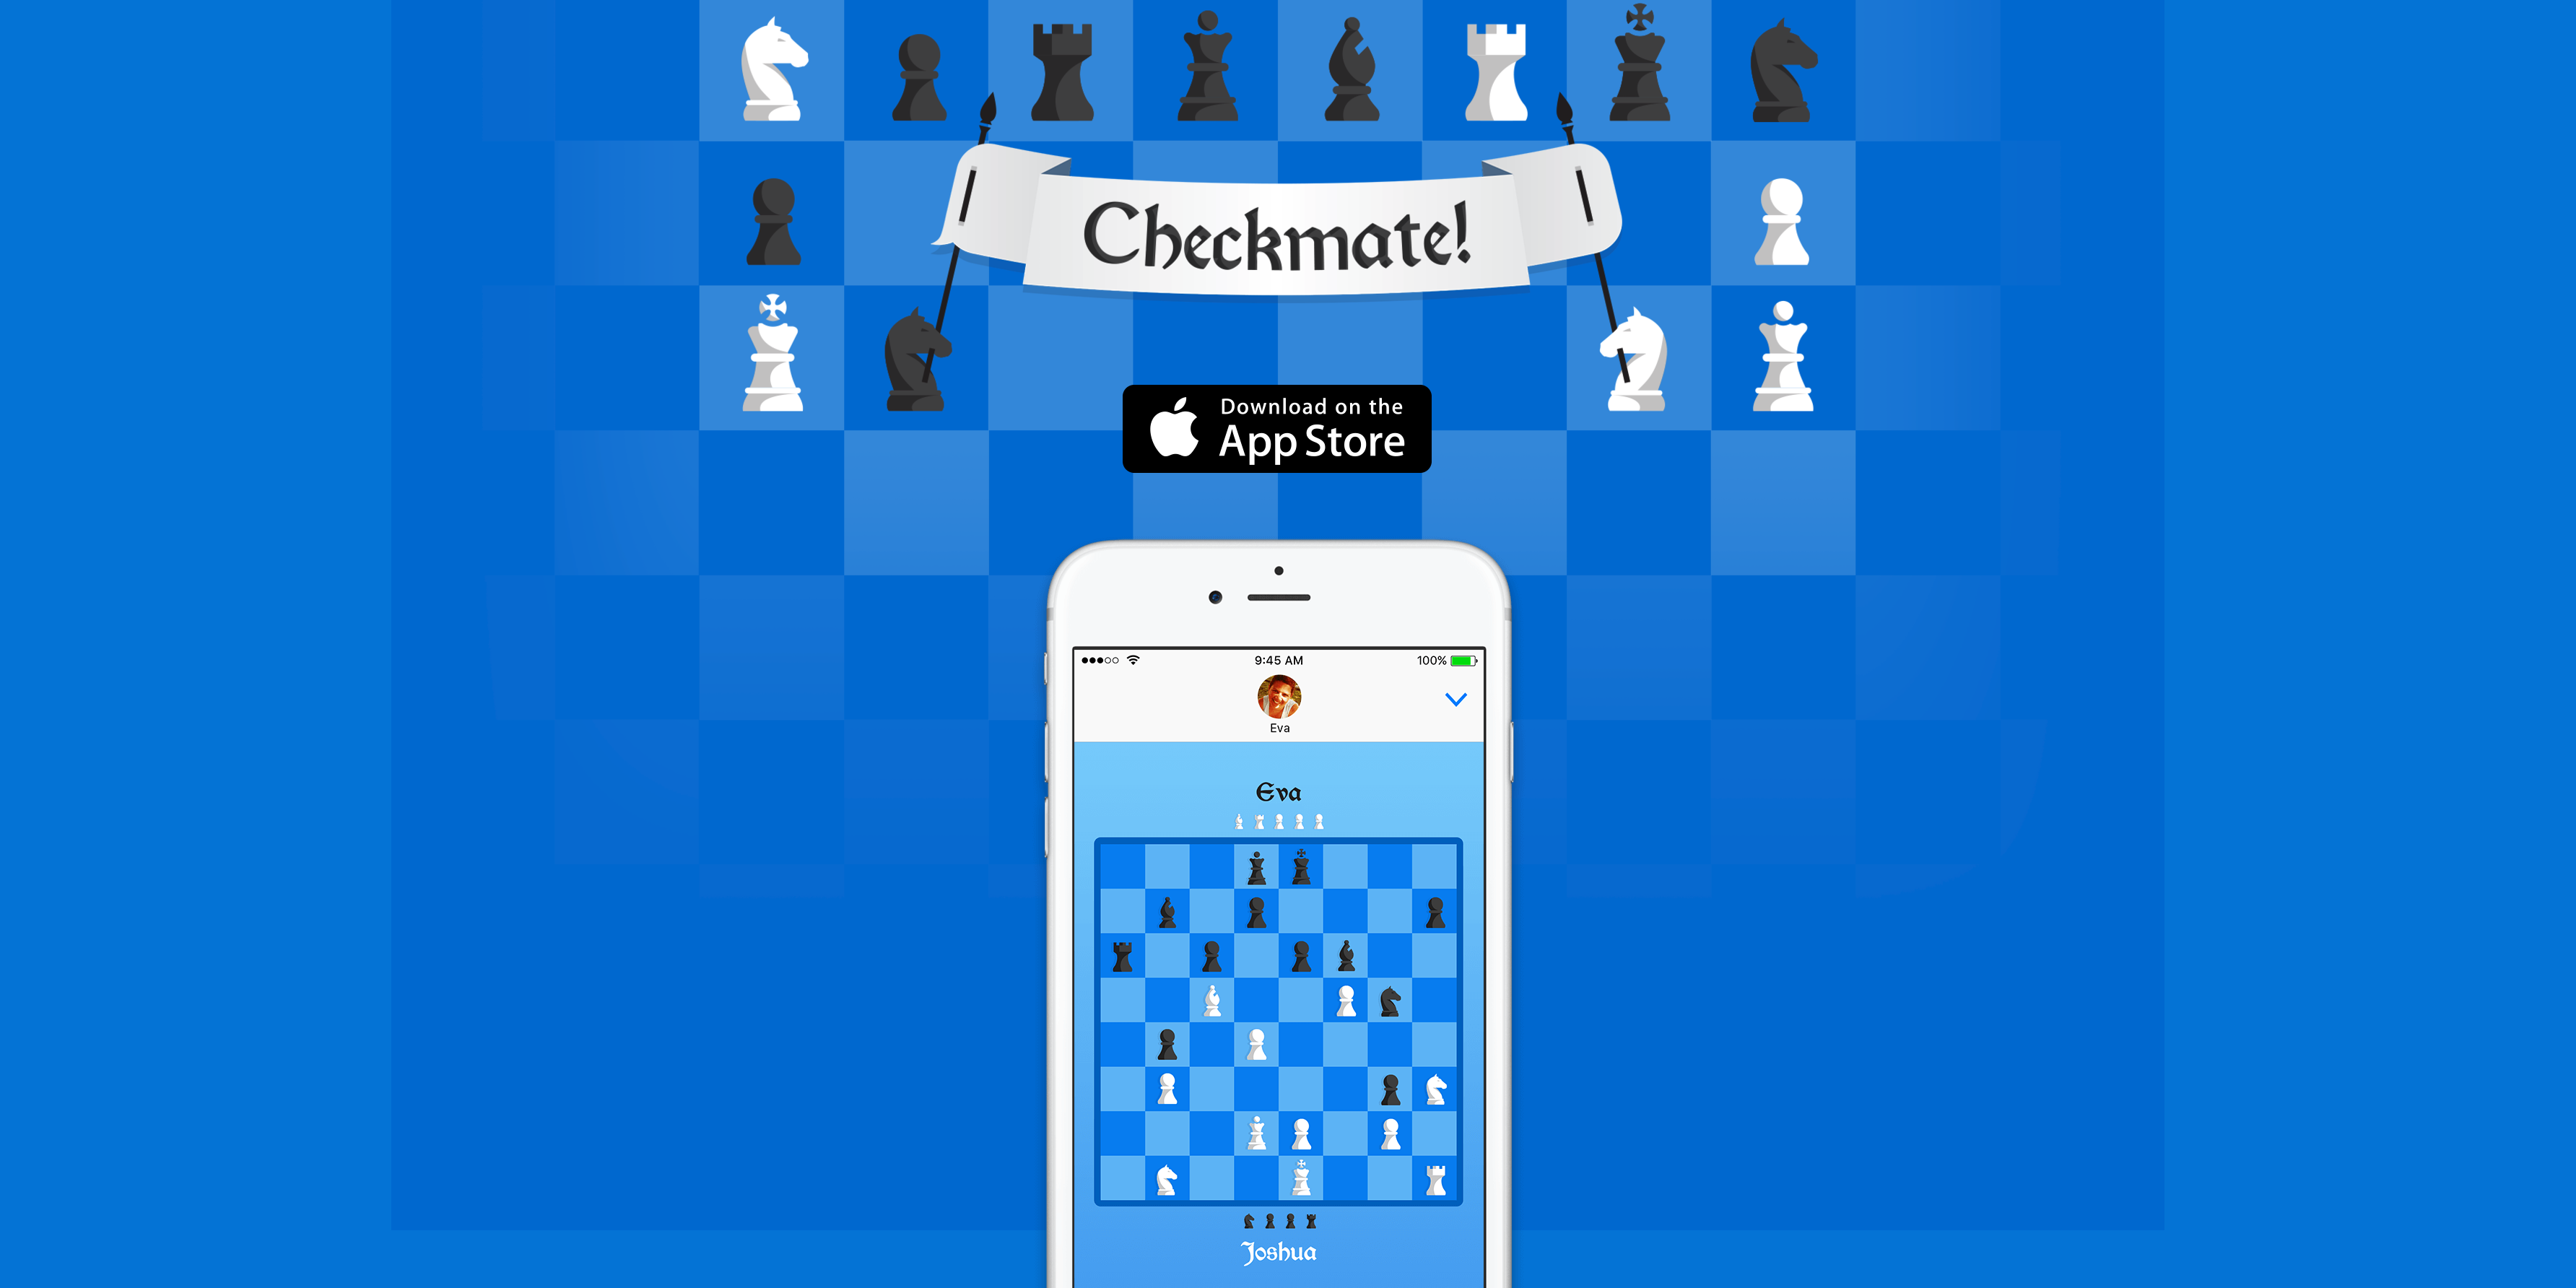 checkmate app